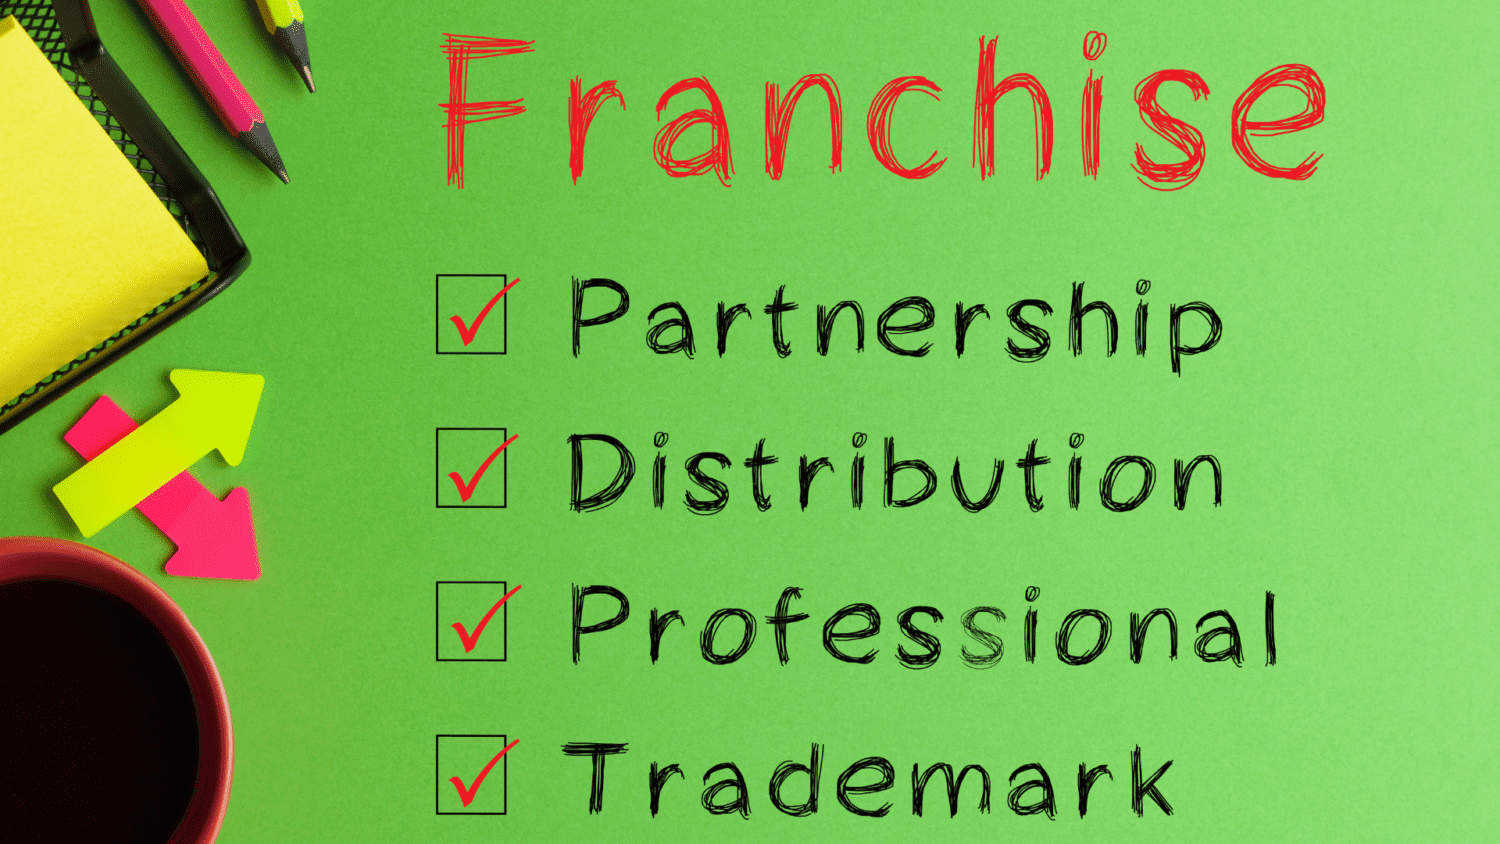 How Many Franchise Organizations Are In The USA?